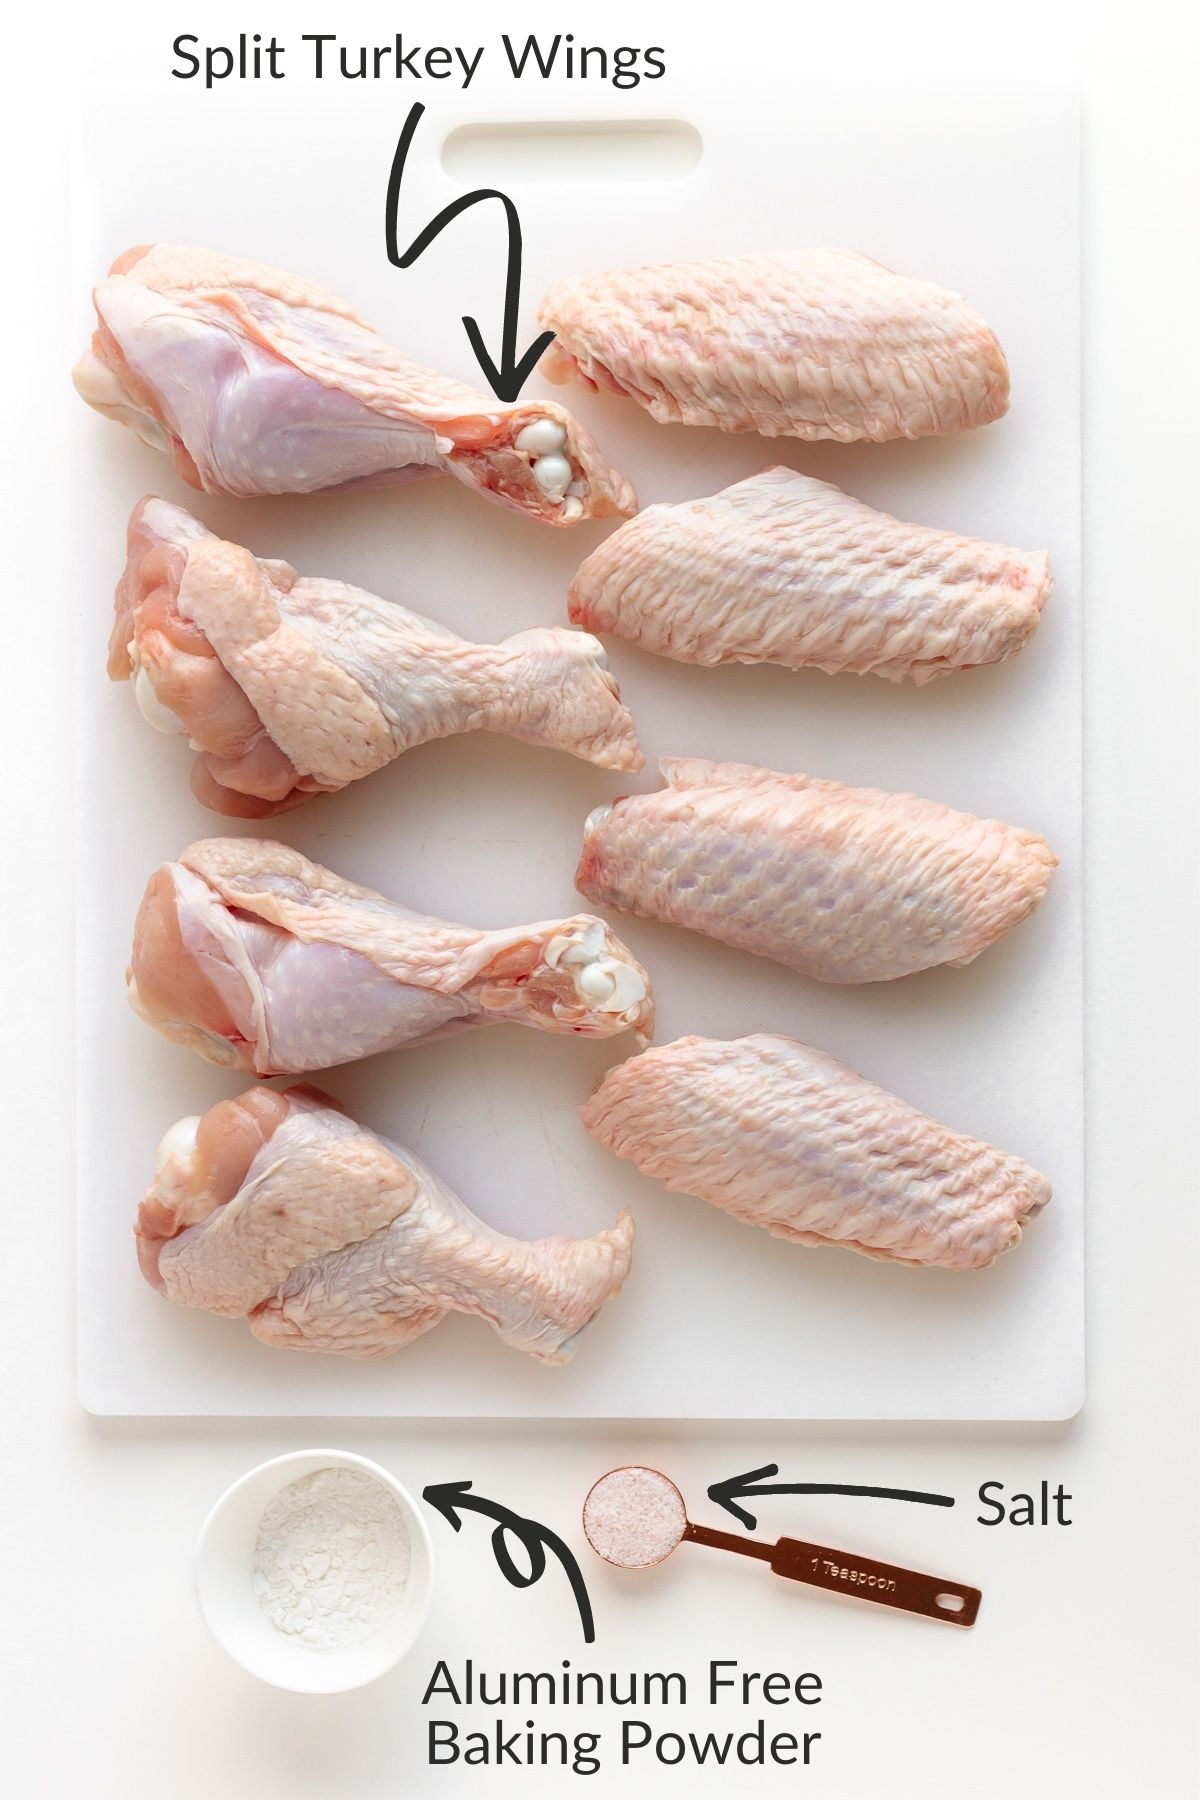 Labelled image of ingredients needed to make crispy baked turkey wings.